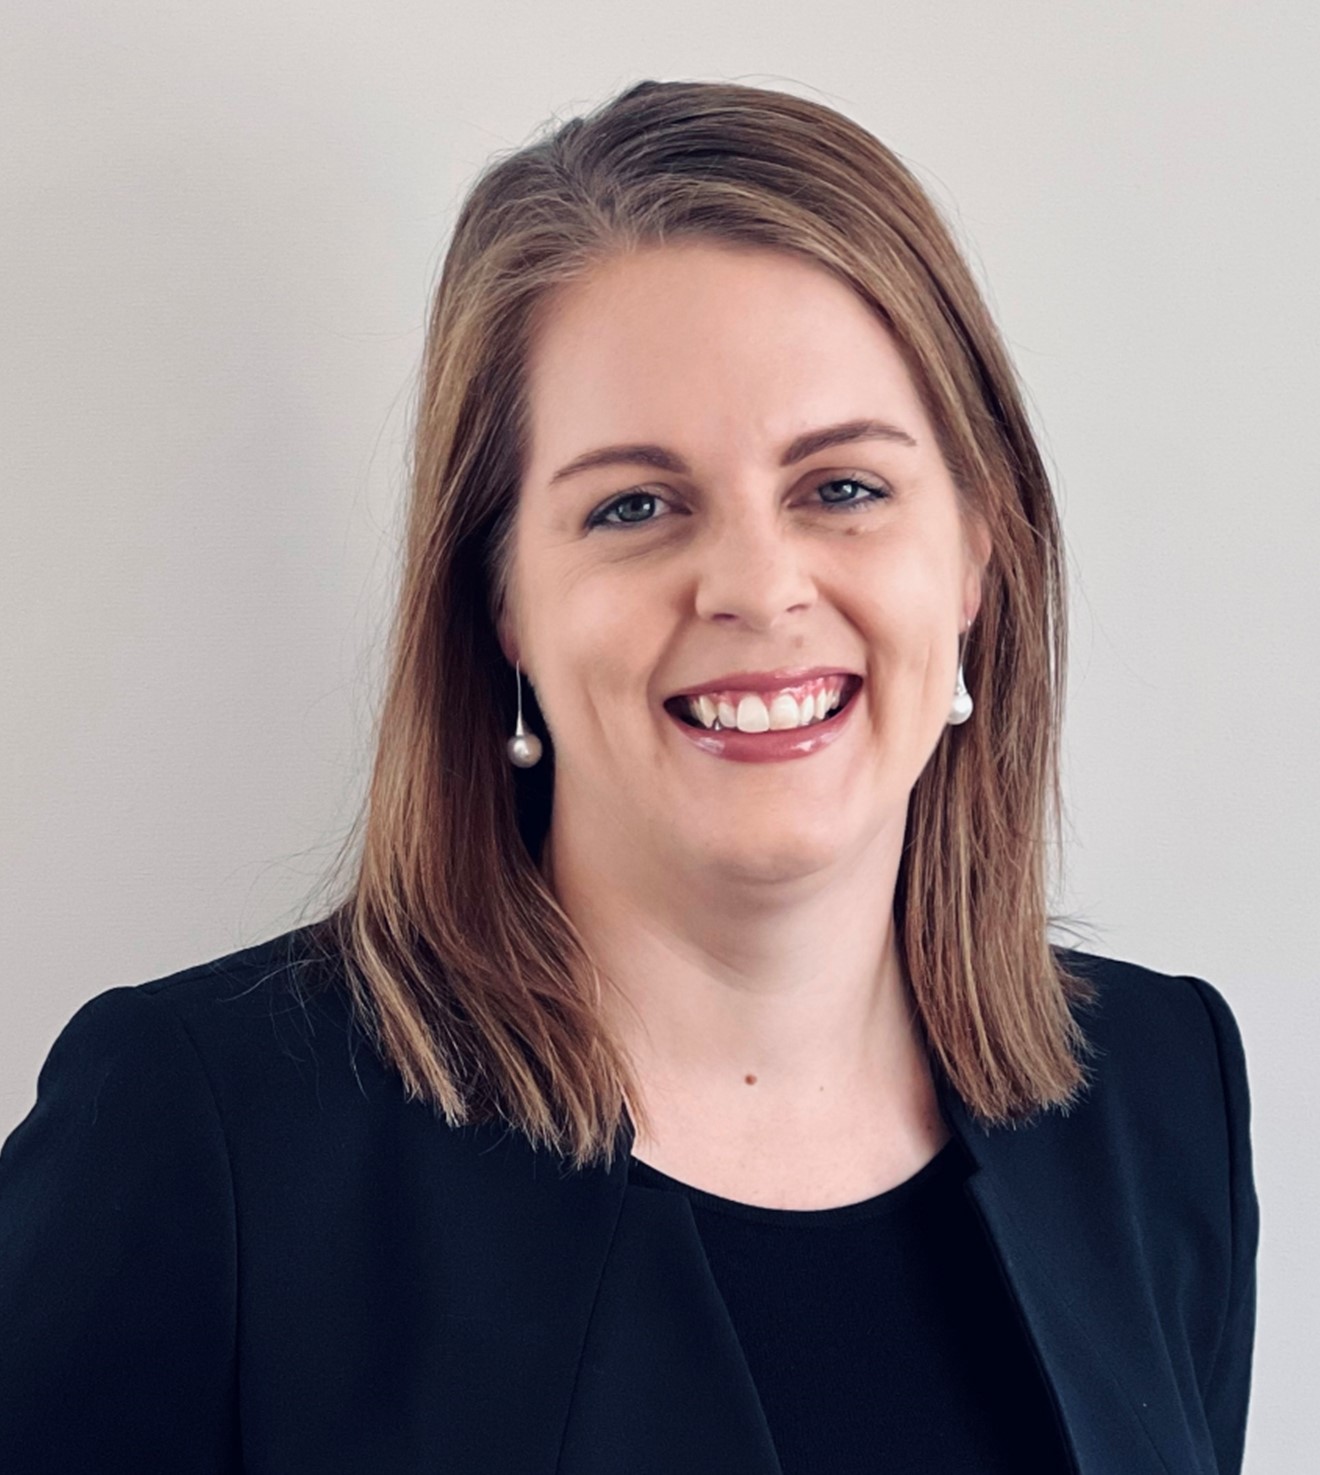 Directors Australia is pleased to announce Katie Simpson has been appointed GM Advisory